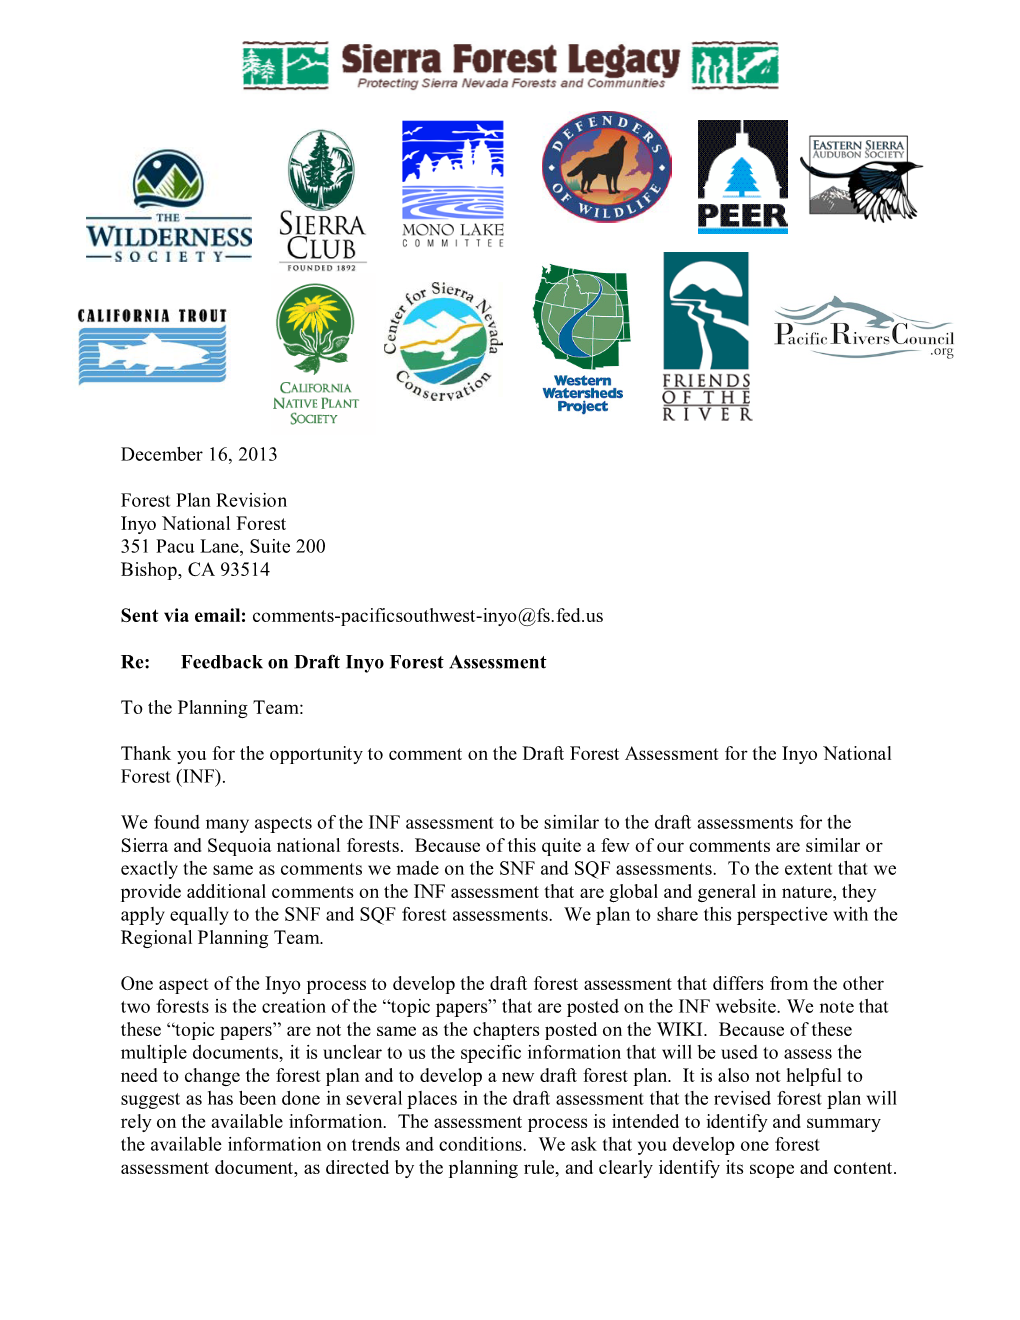 Comments 12-16-2013 Inyo NF Draft Forest Assessment